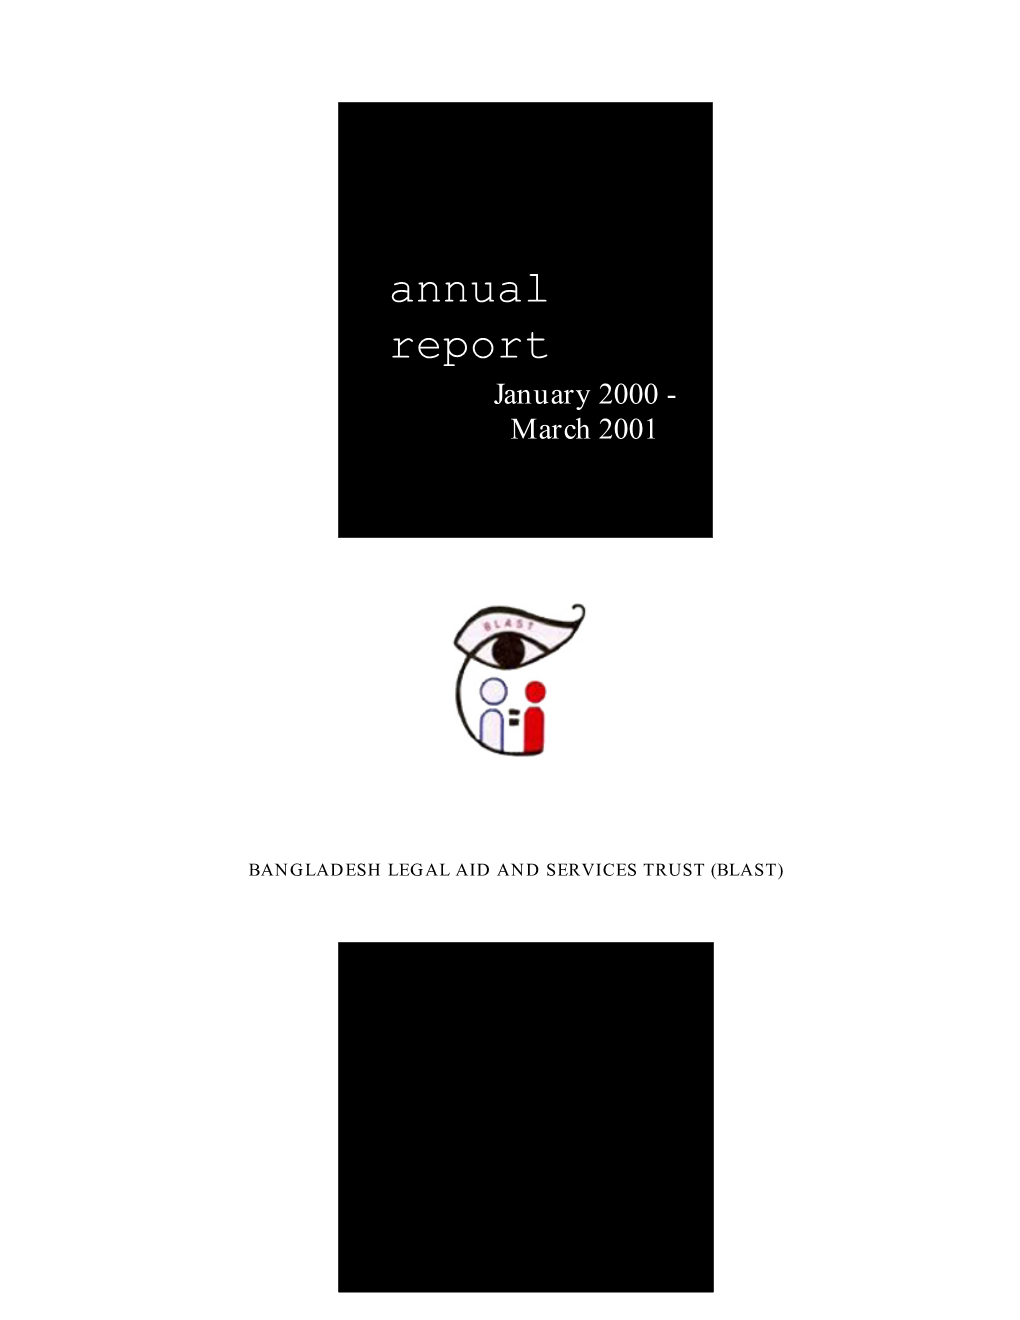 Annual Report Since Activities of Projects Are Only Summarised and Not Detailed in This Report)